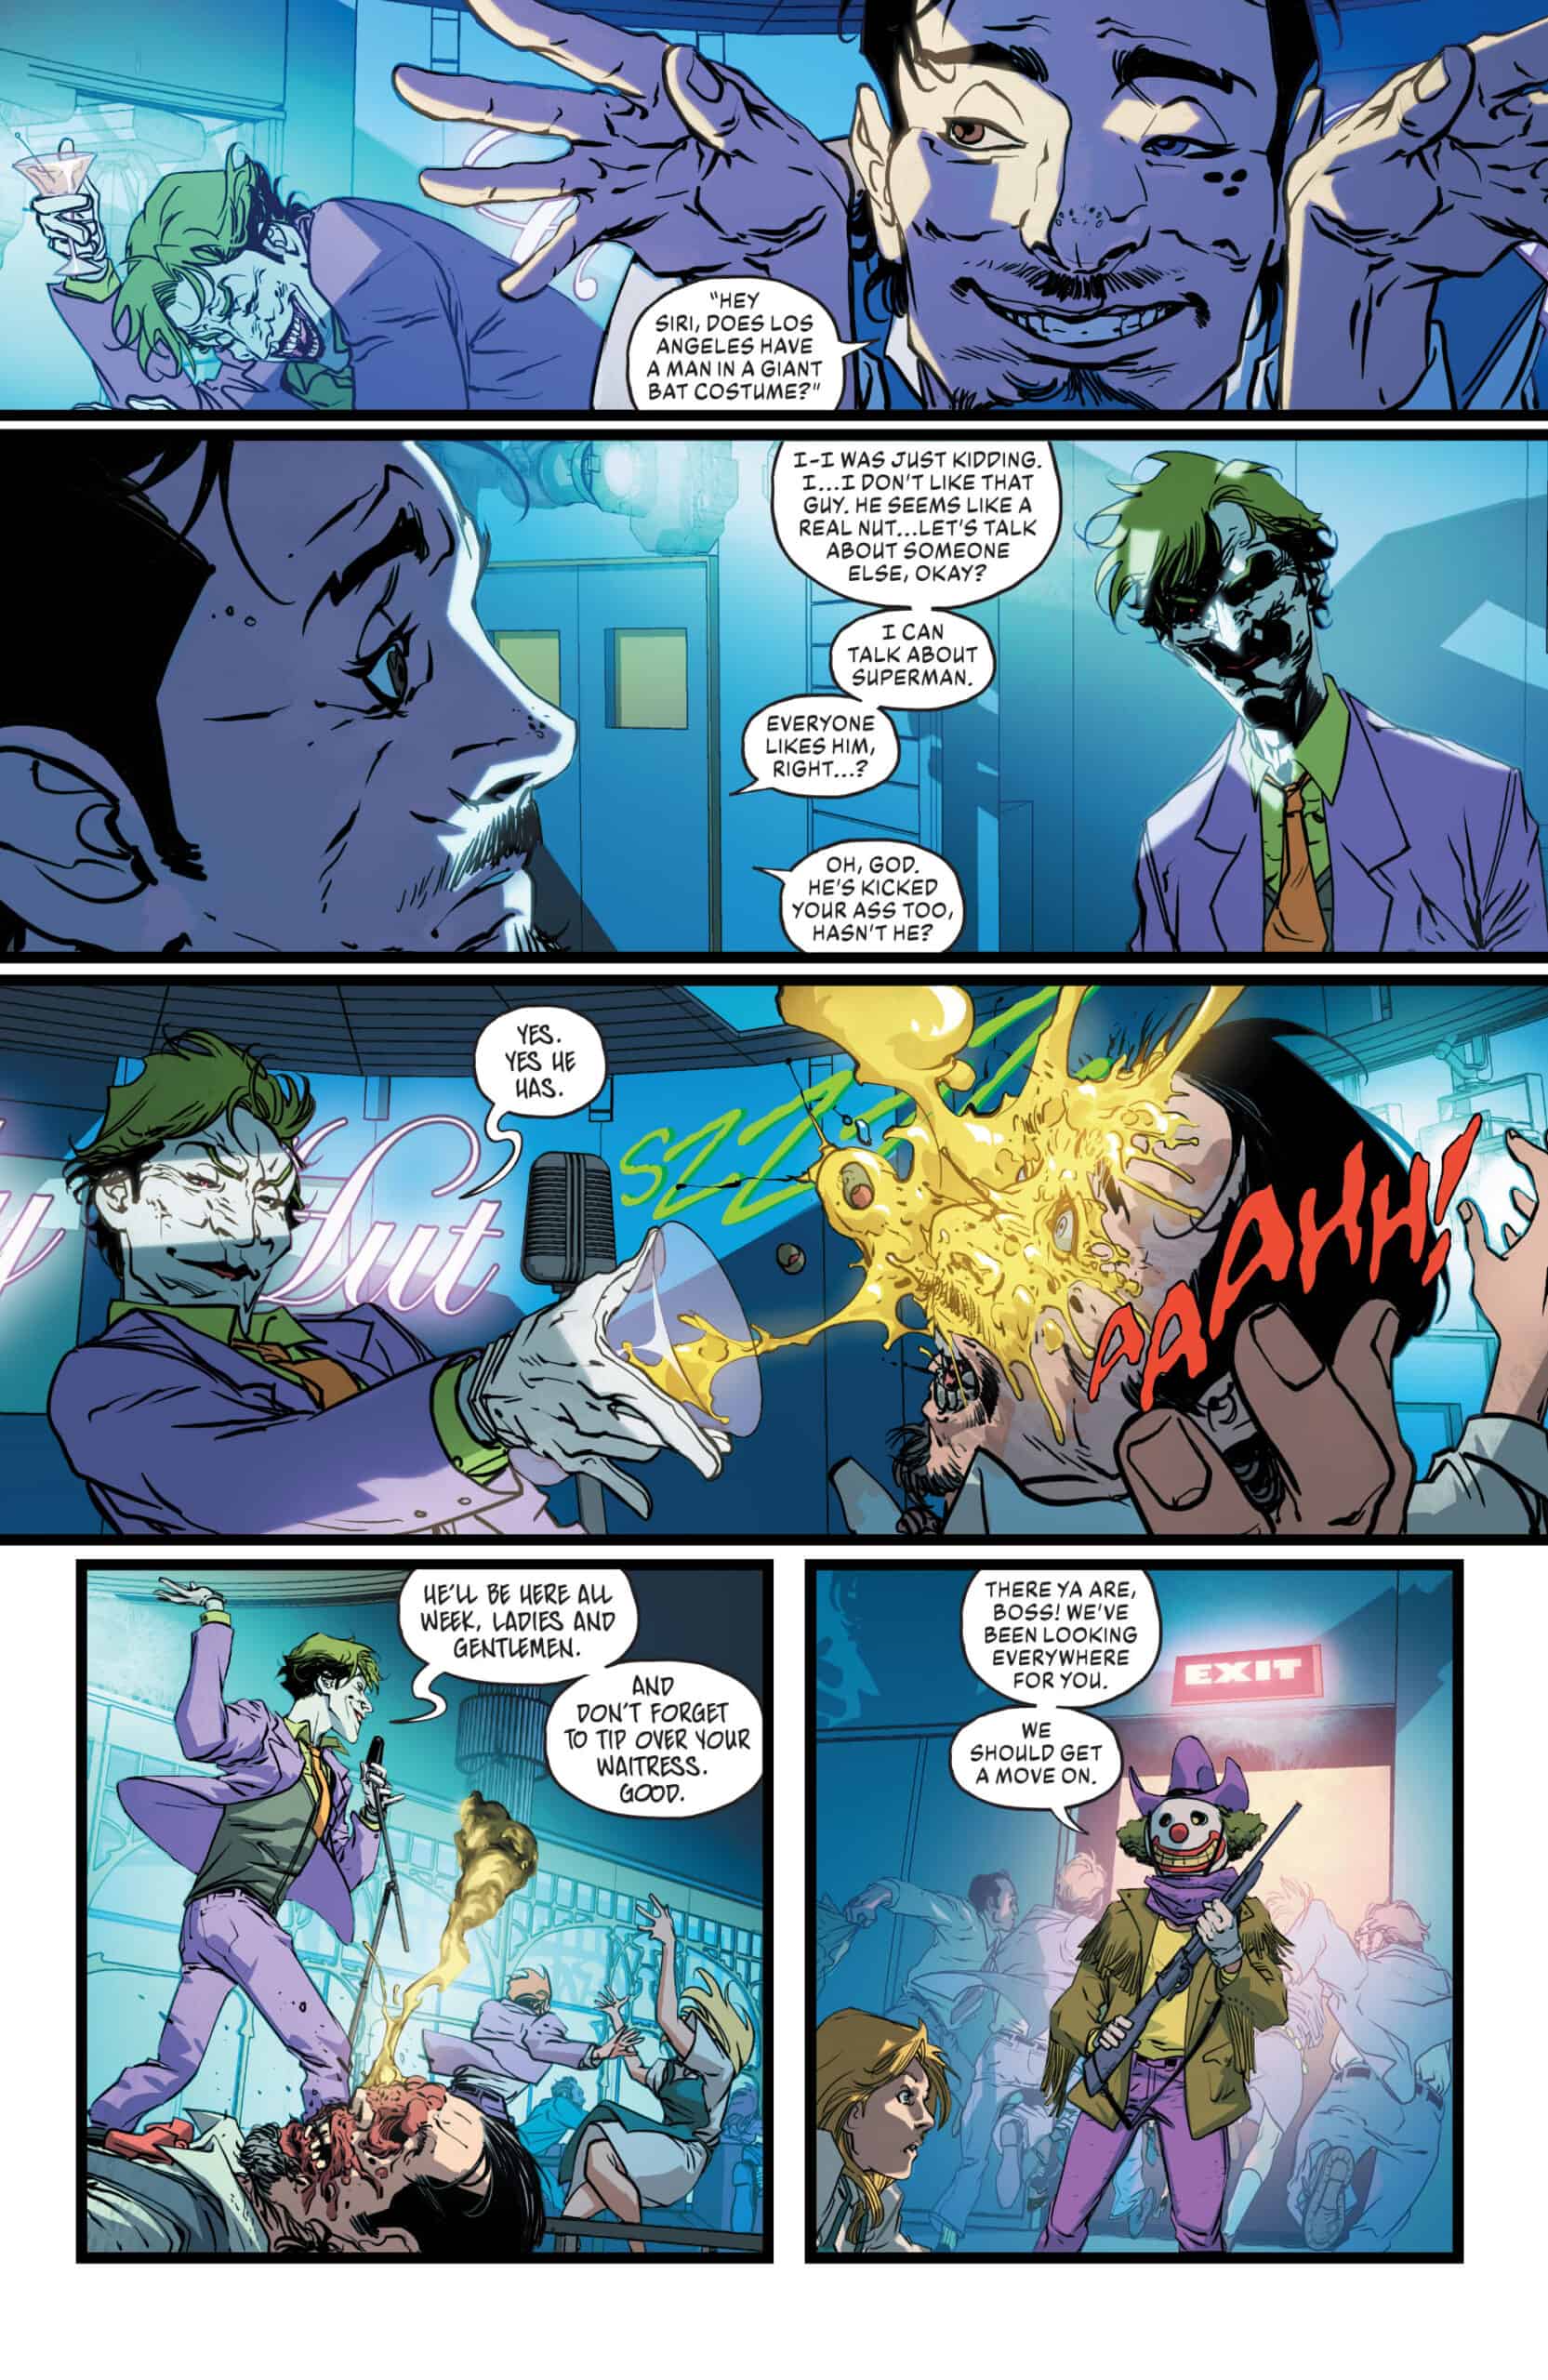 Joker: The Man Who Stopped Laughing #3 review